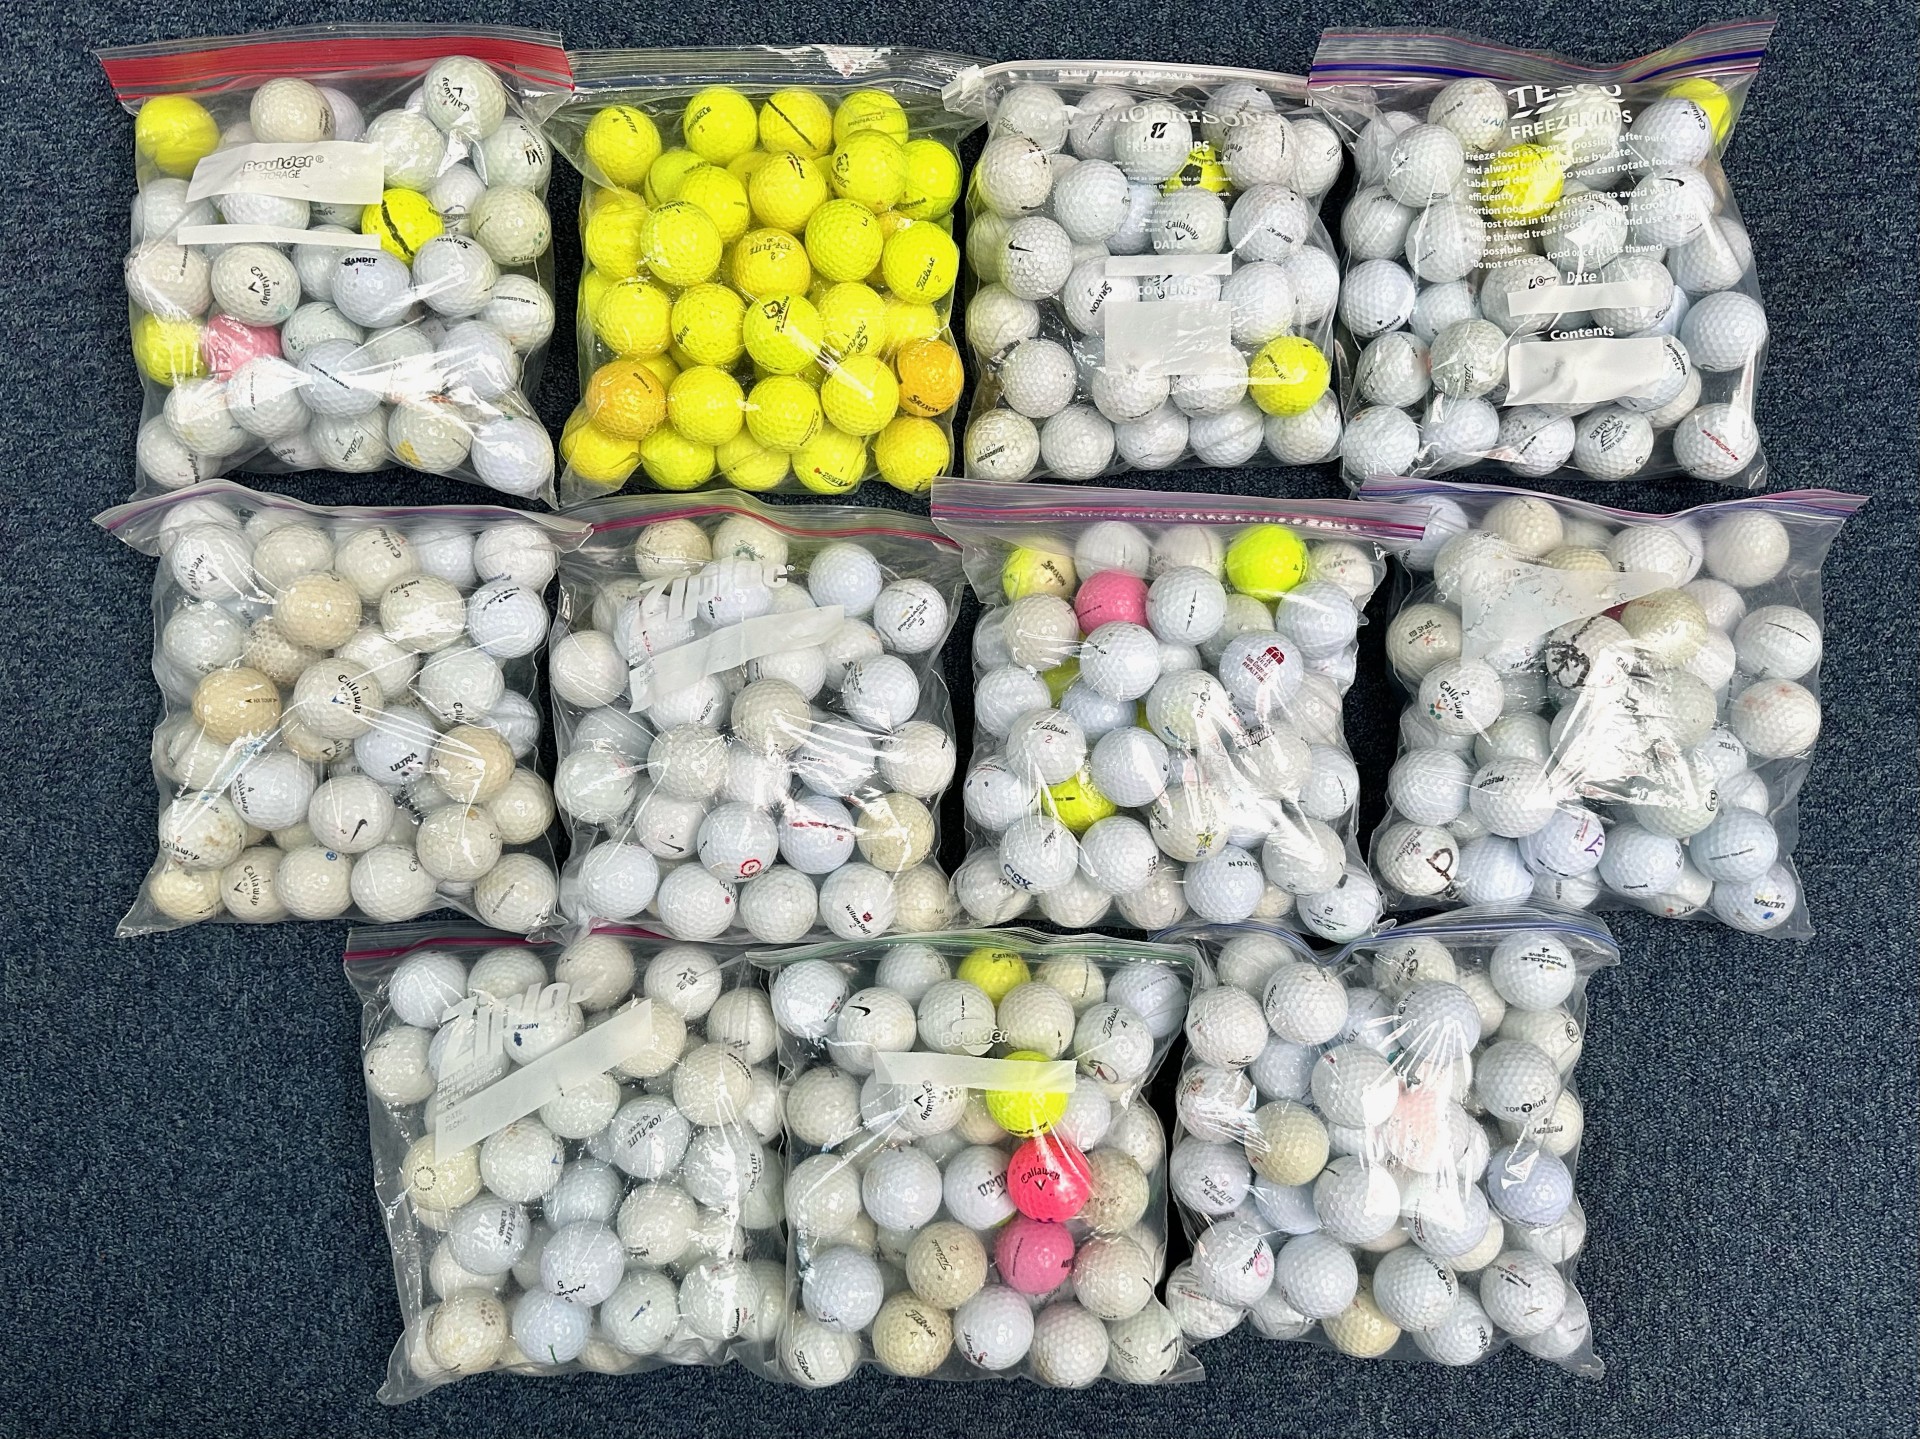 A Collection of Good Quality Golf Balls . To include many makes some of the better makes including